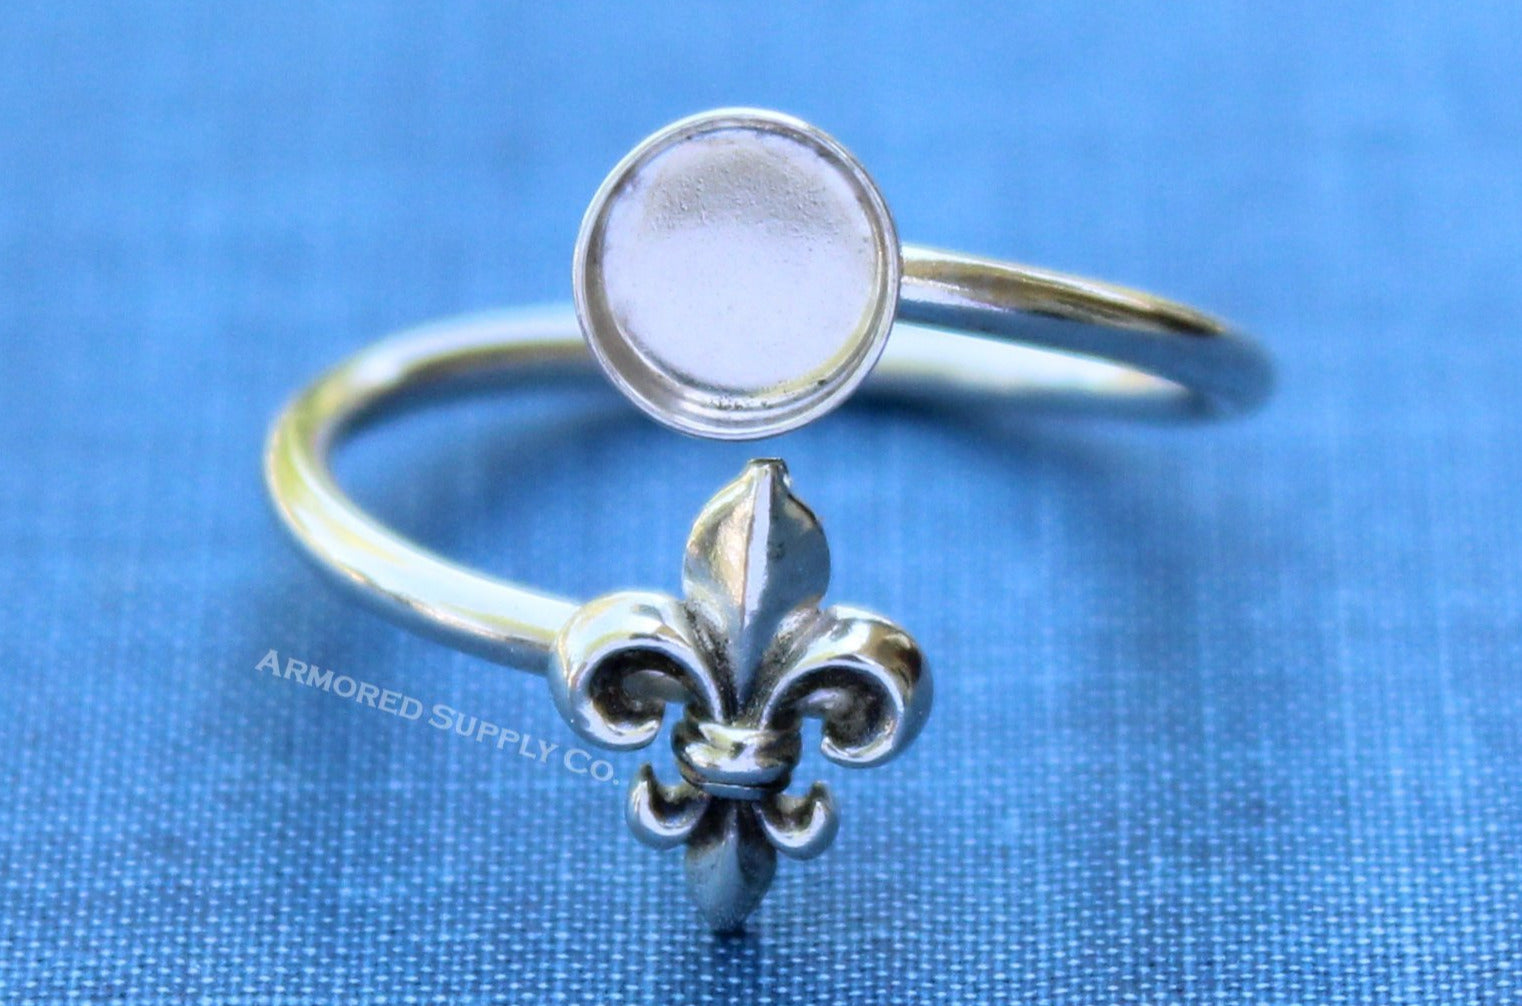 Silver Fleur De Lis Wrap Adjustable Bezel Cup Ring blank, Round Cabochon, Breast Milk DIY jewelry supplies, build a ring, wholesale jewelry